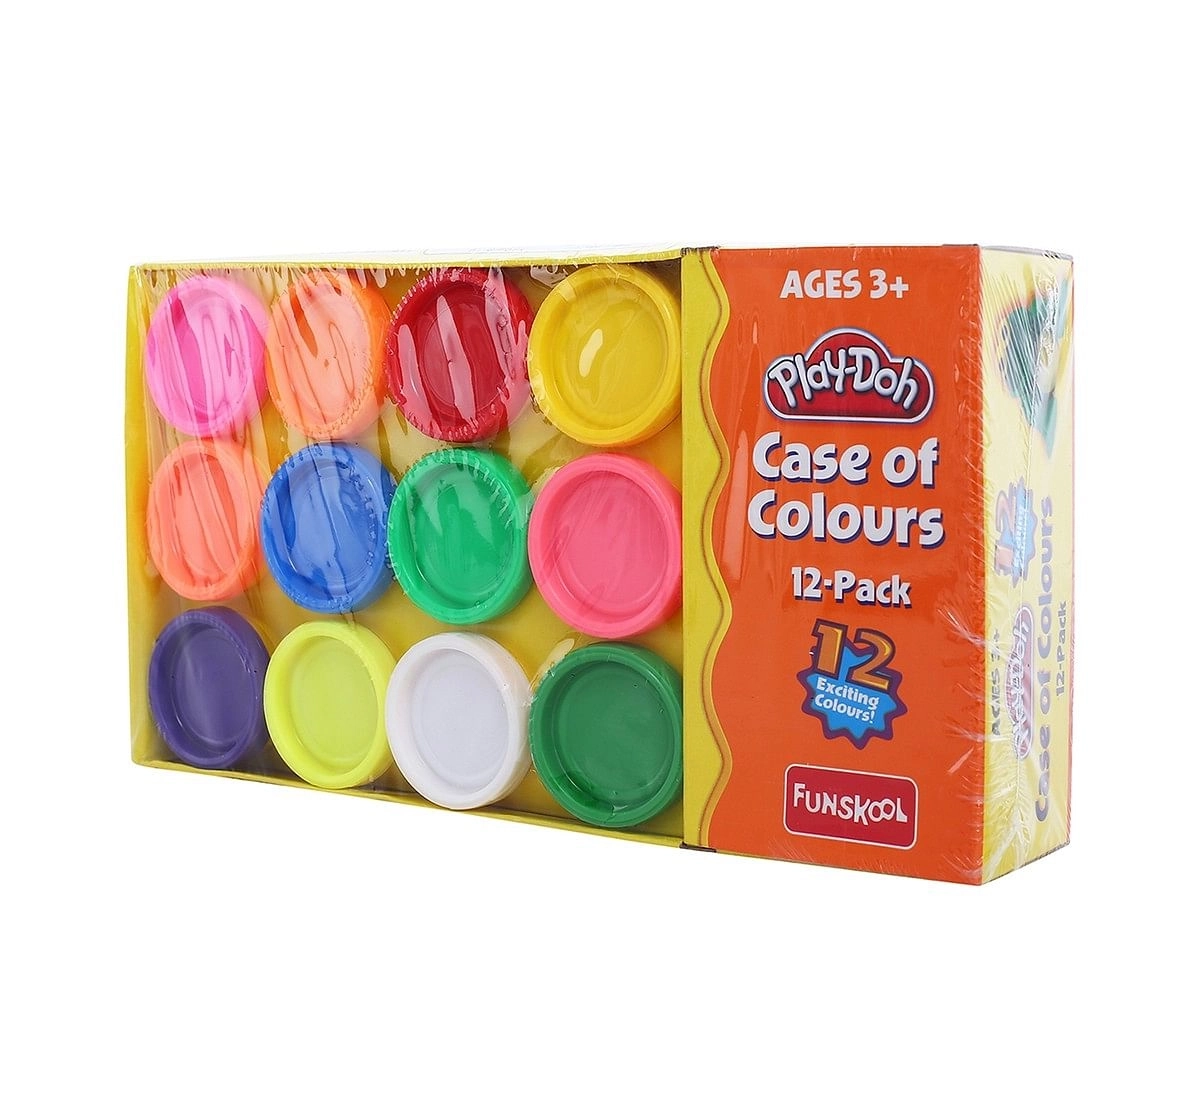 Funskool Play-Doh Case Of Colours Clay & Dough for Kids age 3Y+ 